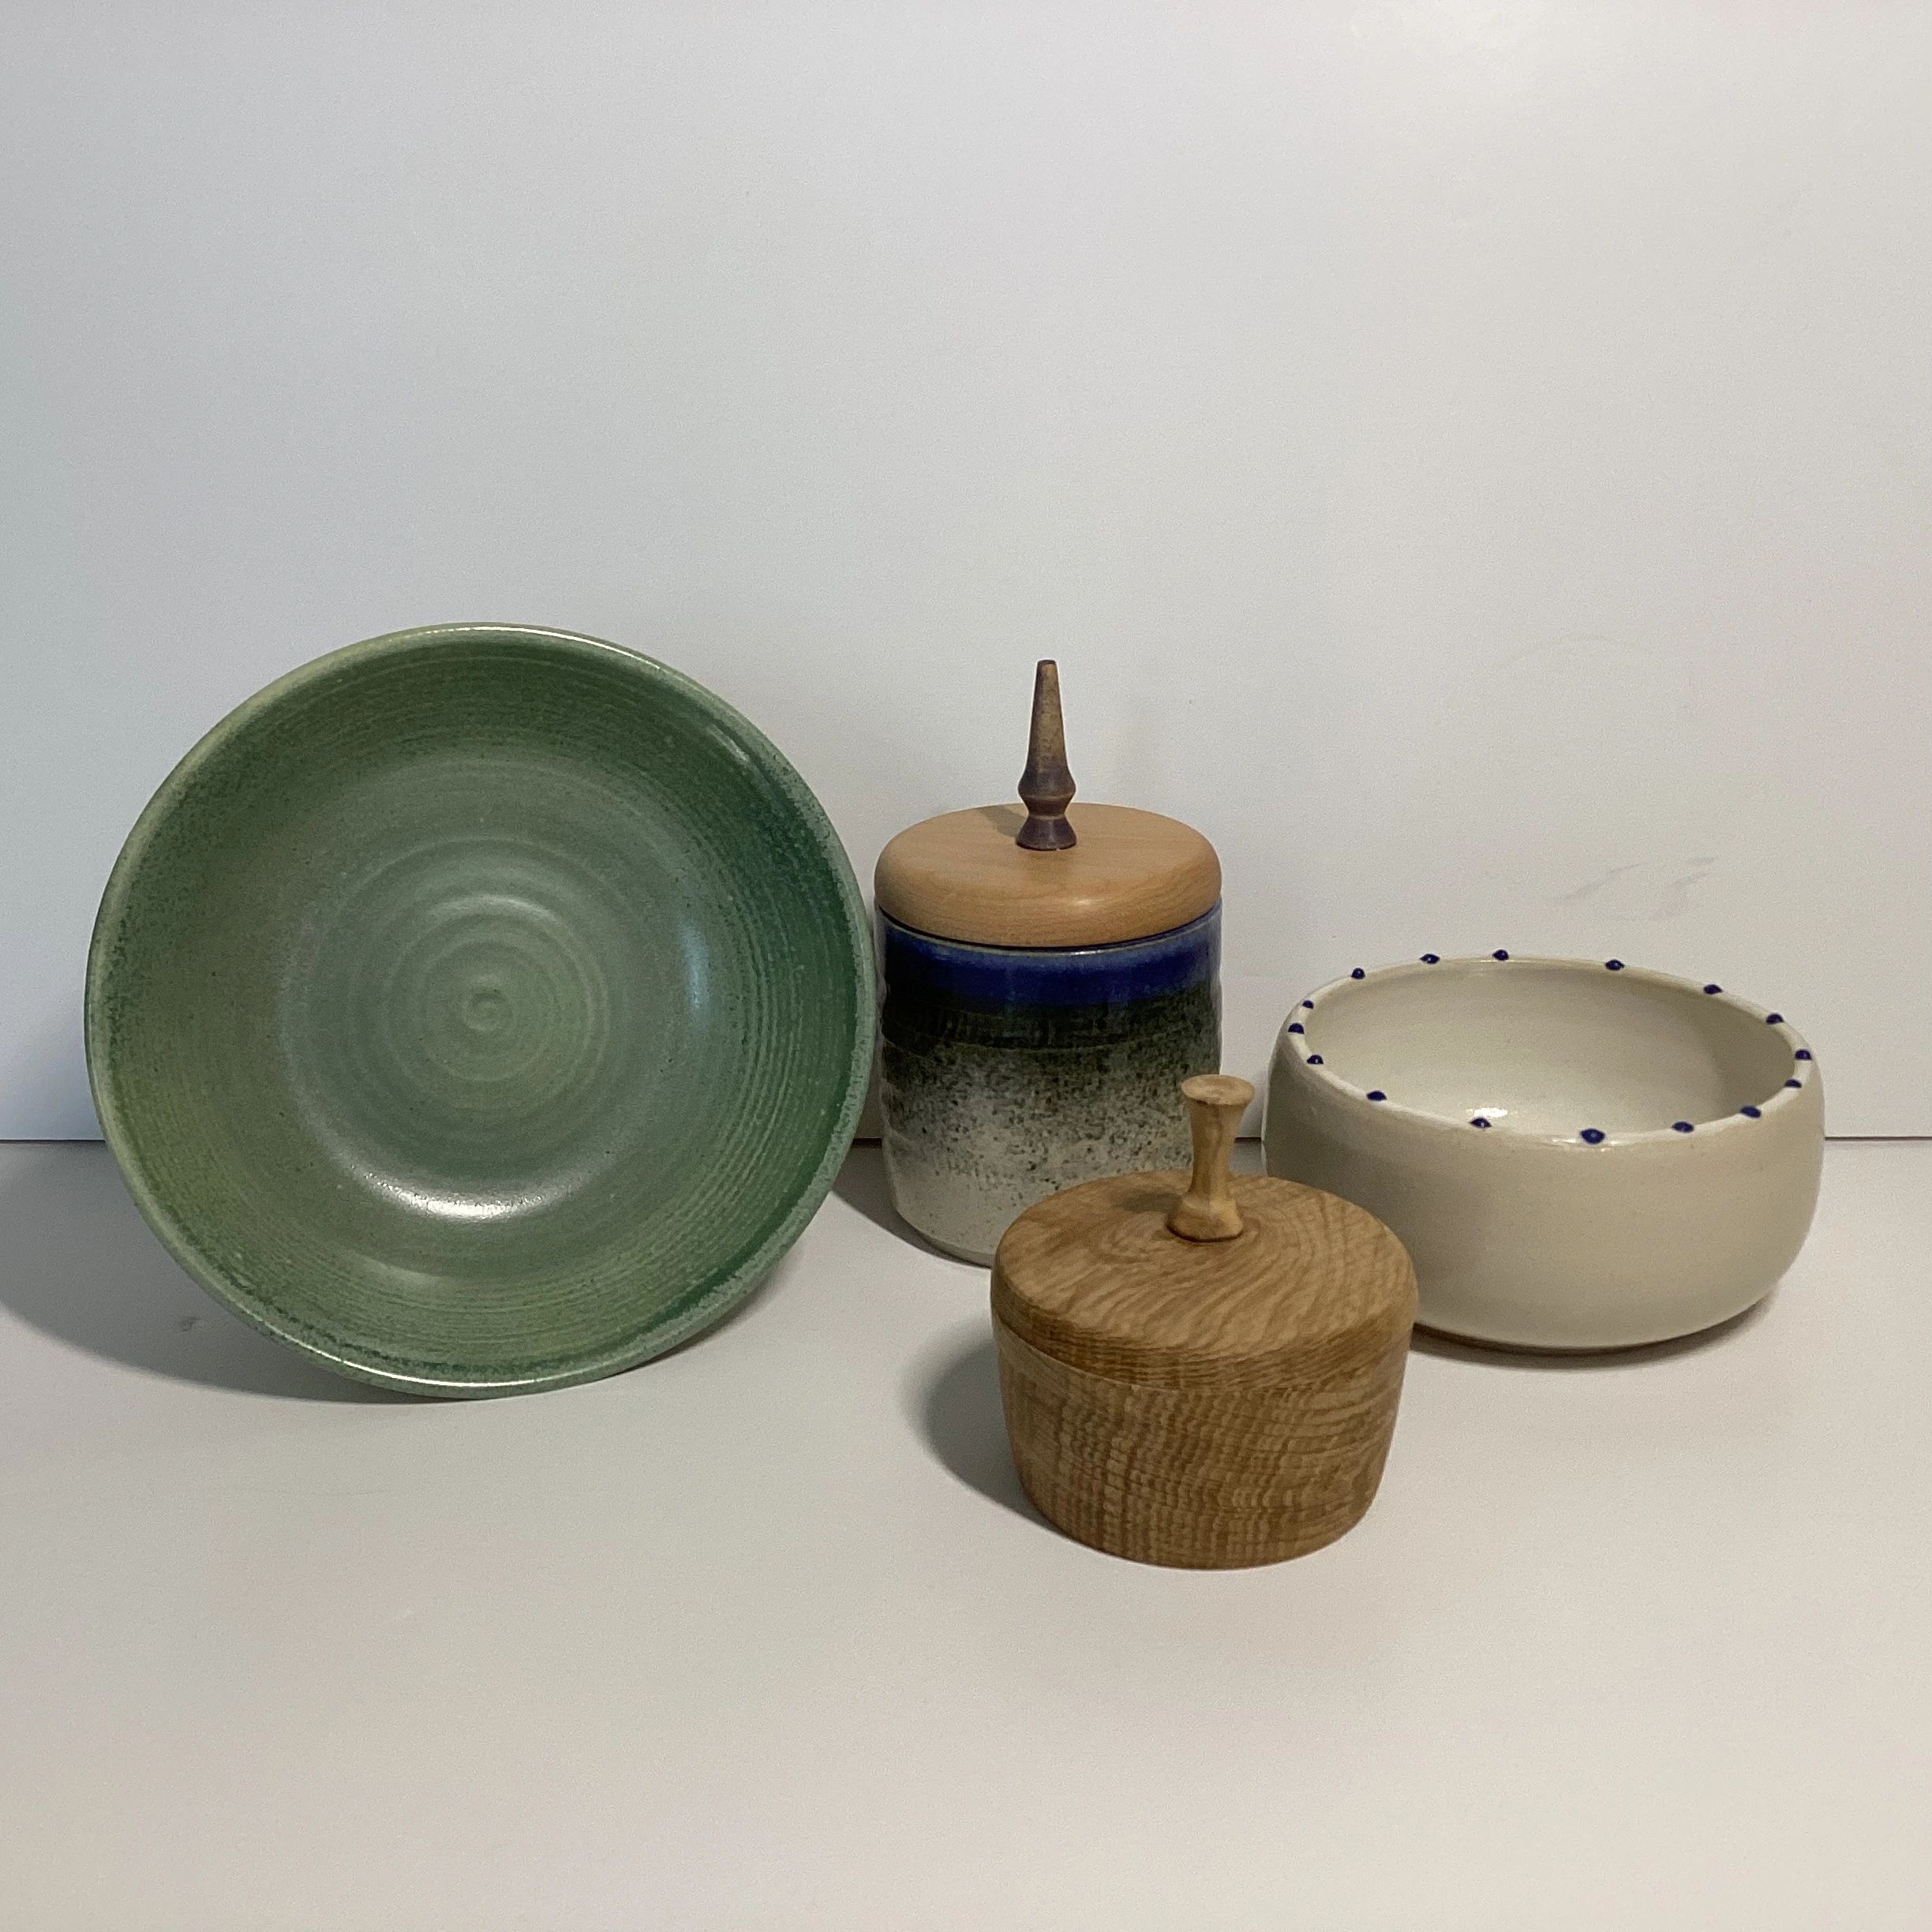 Ceramic plate and bowl and a wooden bowl with lid